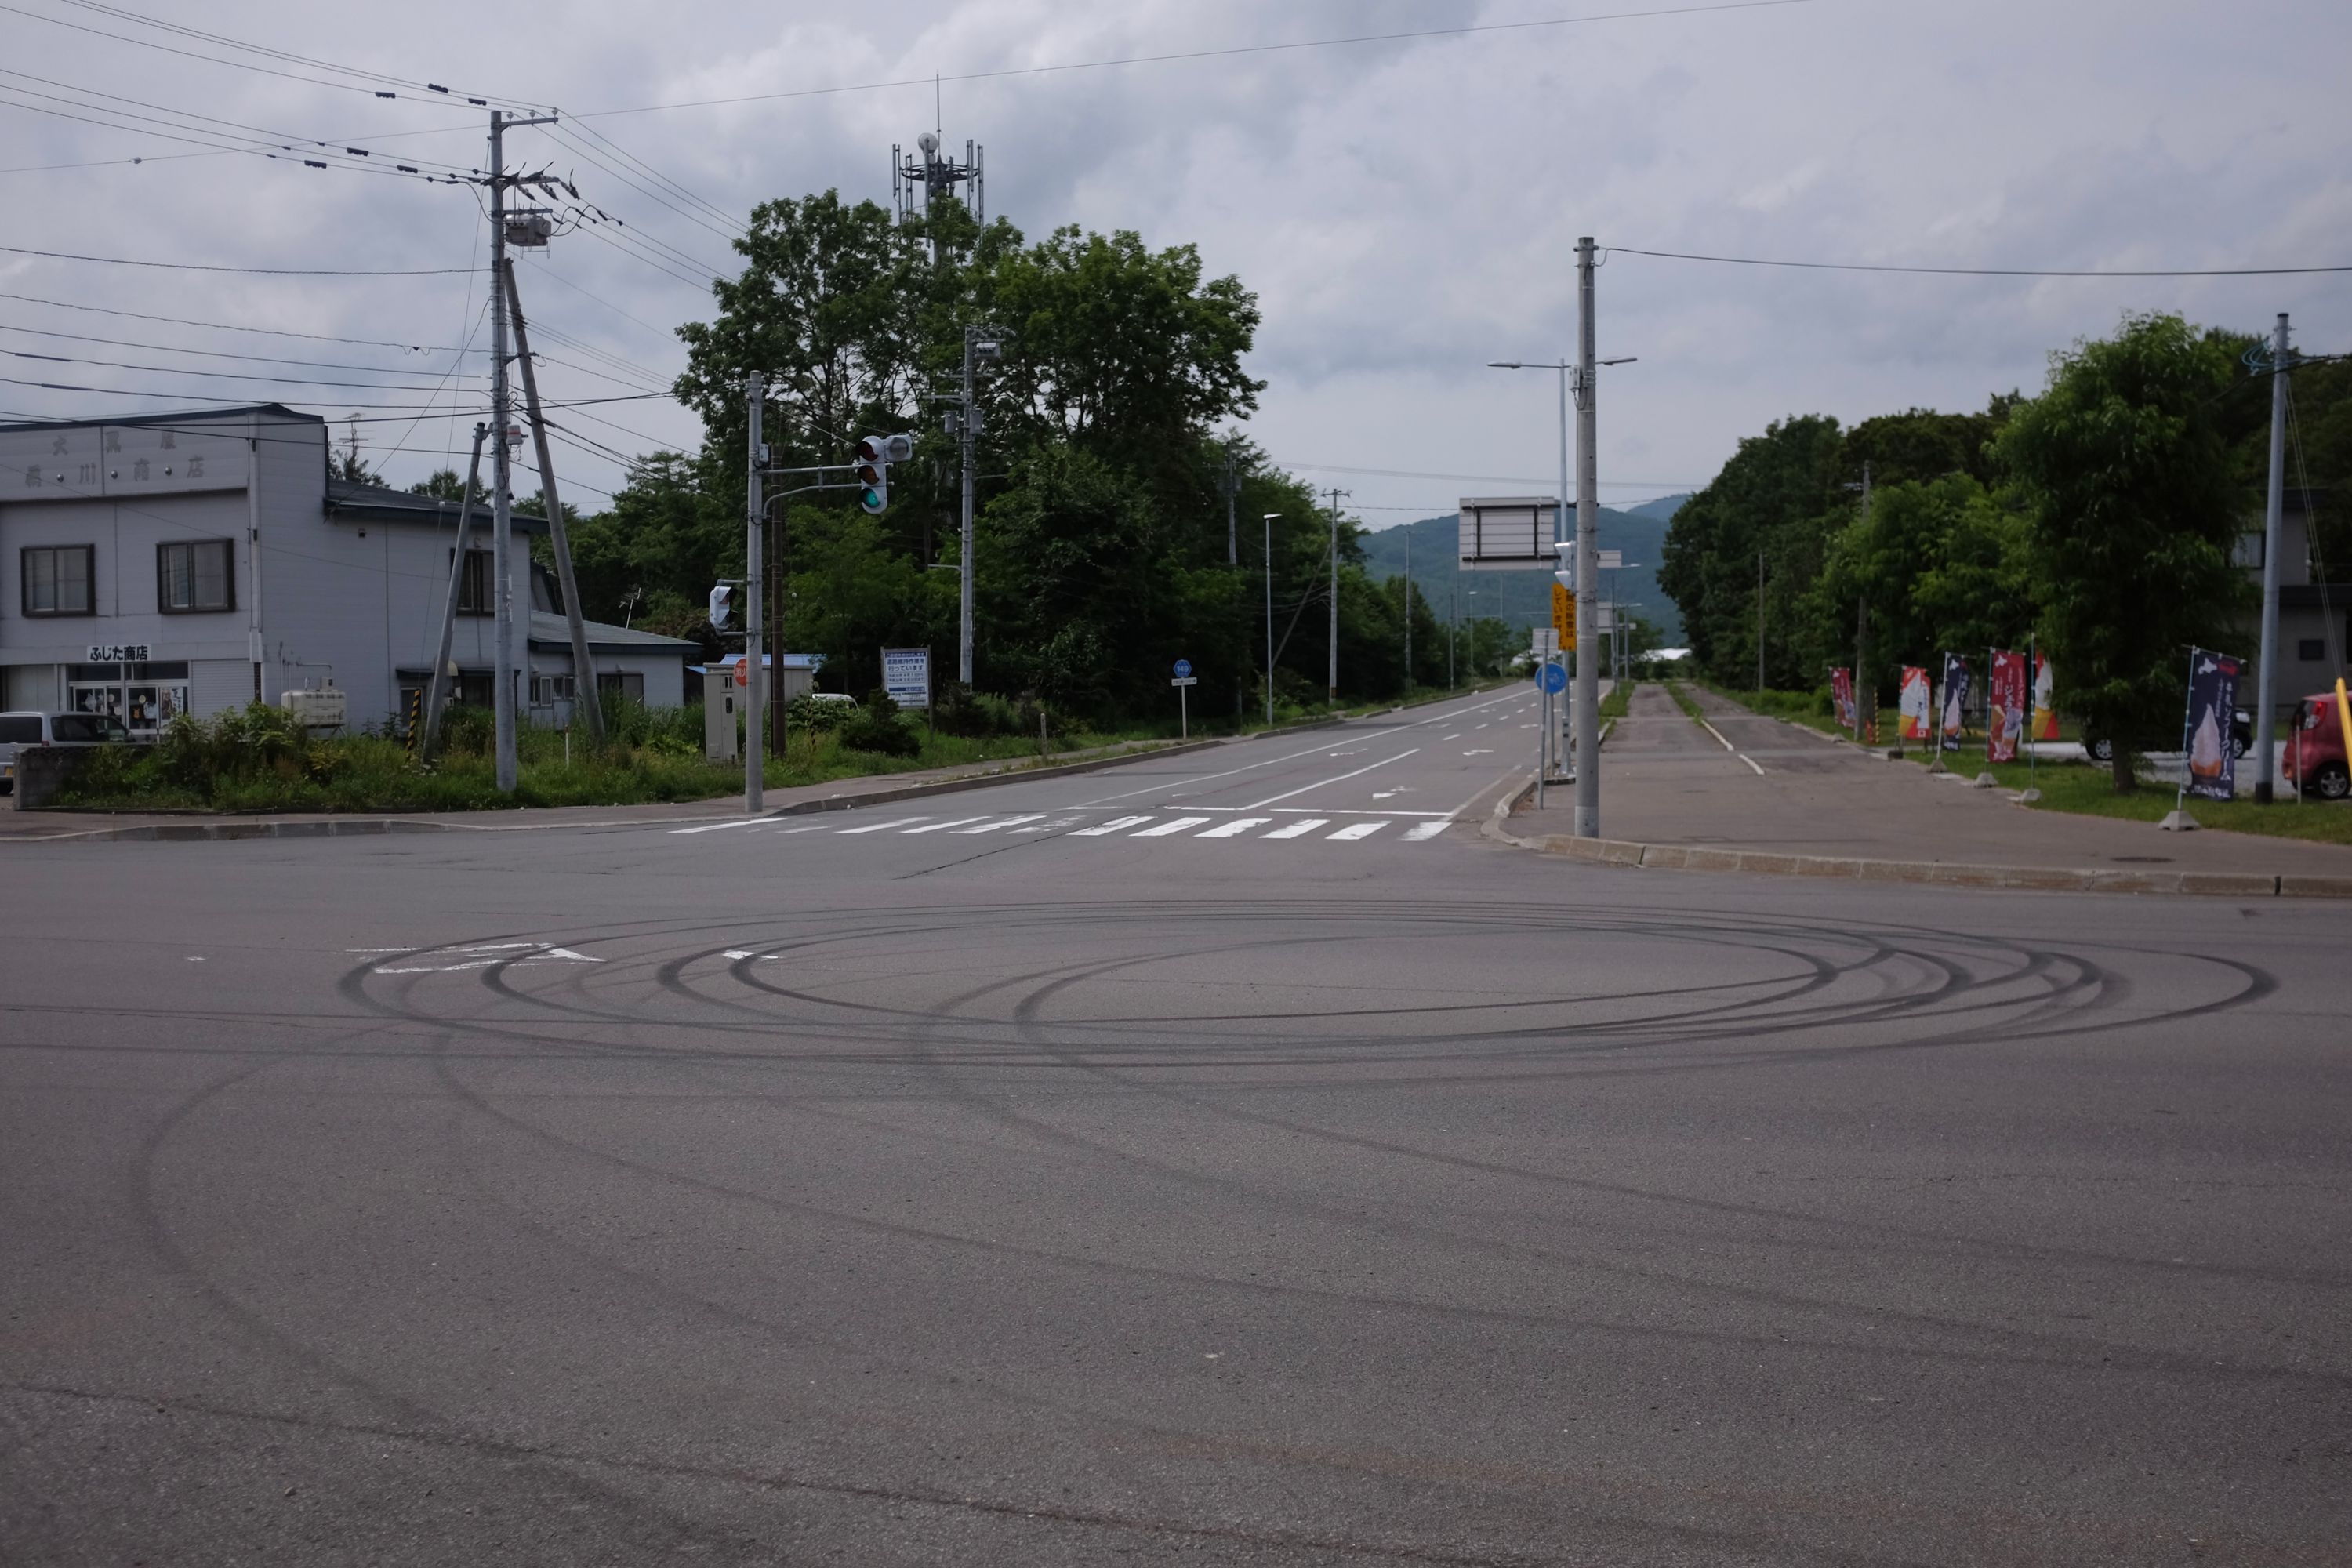 An empty street corner in a small town with marks on the asphalt indicating someone having done donuts.